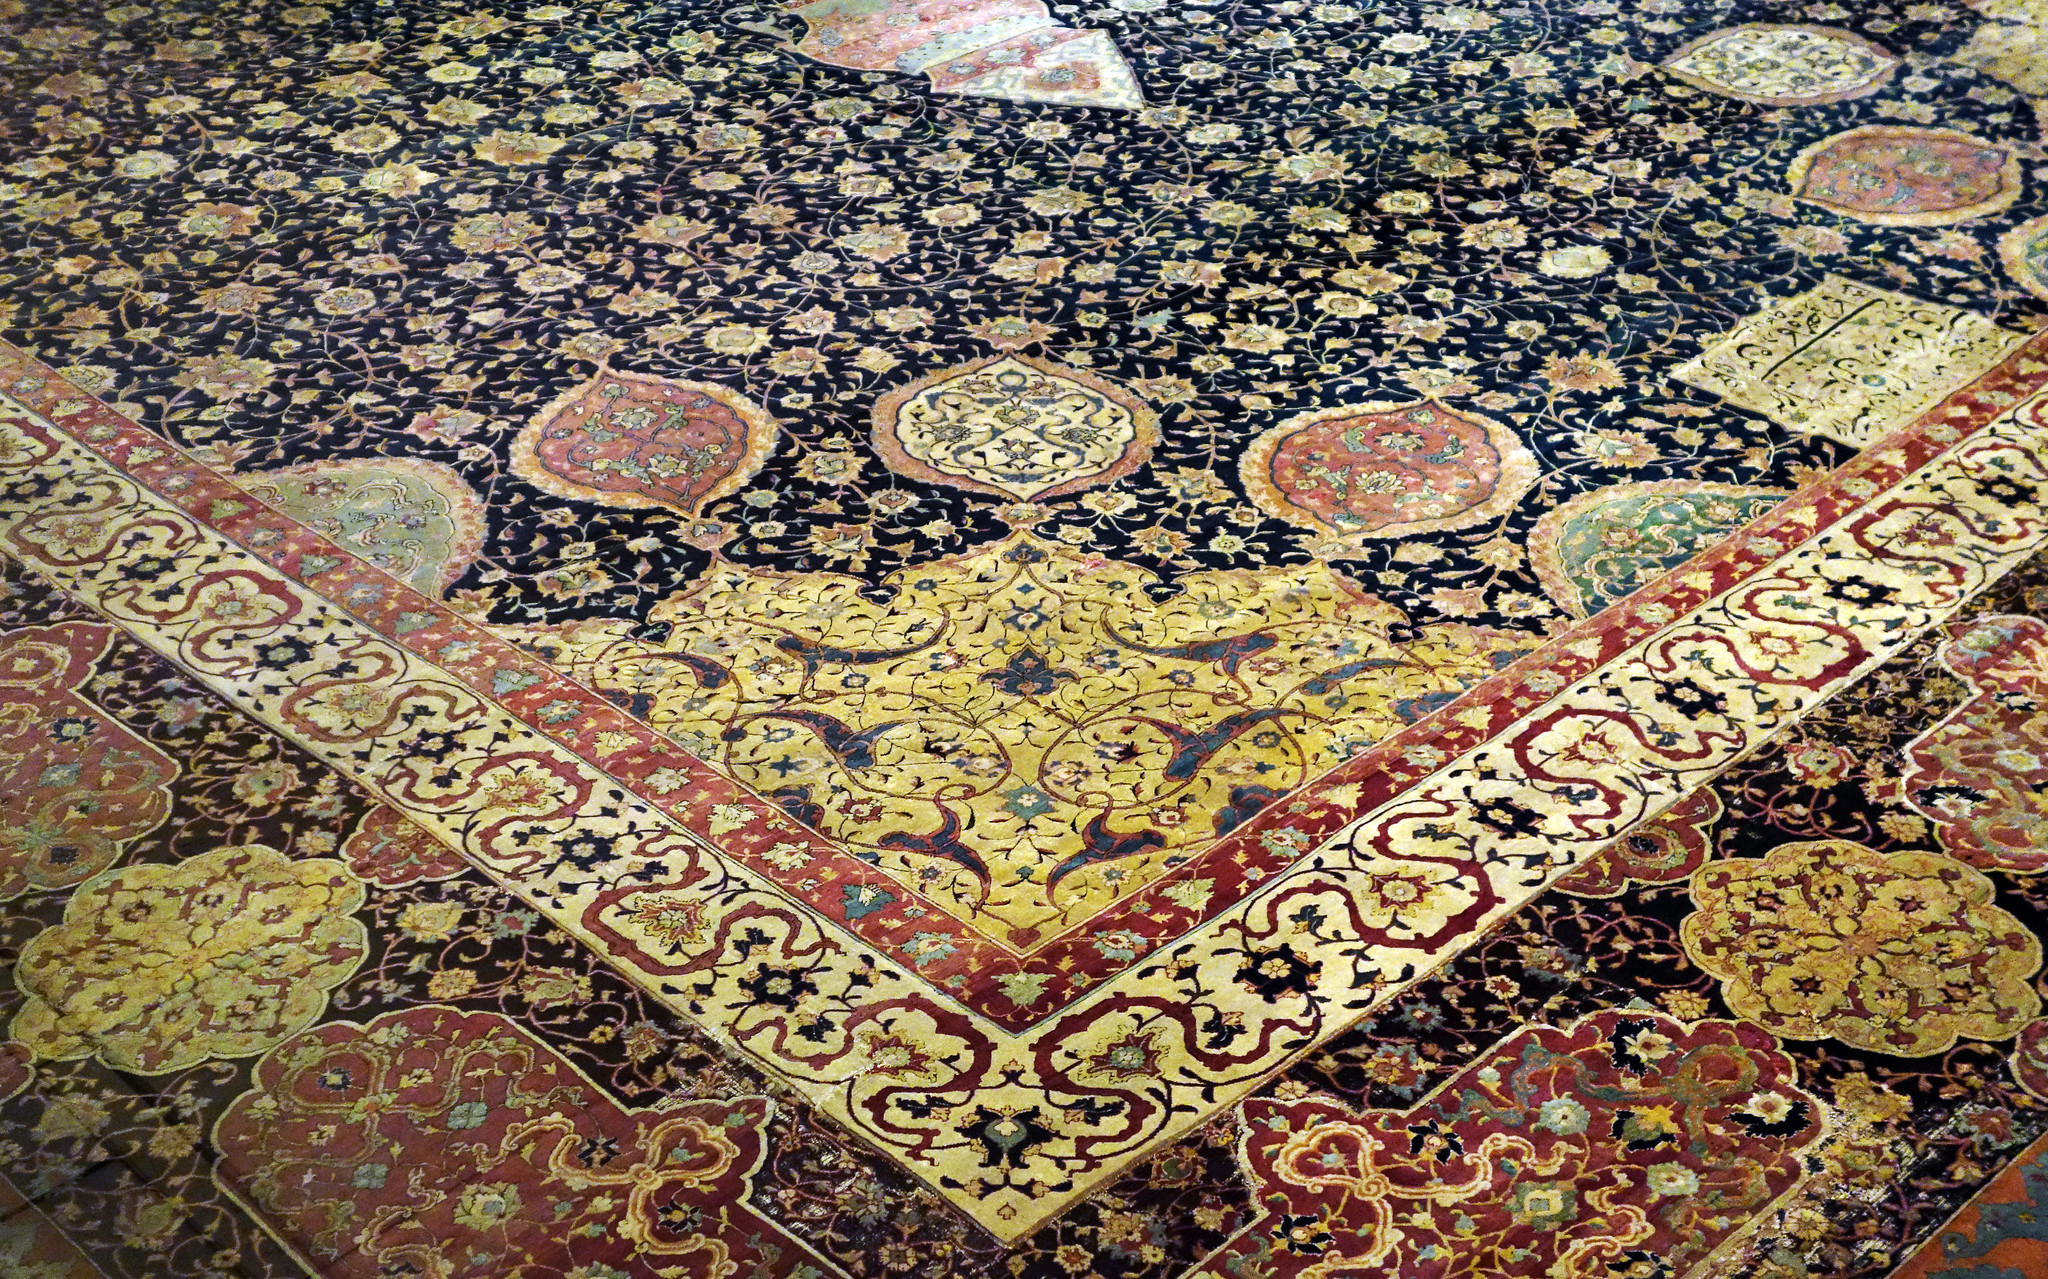 Medallion Carpet, The Ardabil Carpet (detail of corner), Unknown artist (Maqsud Kashani is named on the carpet’s inscription), Persian: Safavid Dynasty, silk warps and wefts with wool pile (25 million knots, 340 per sq. inch), 1539-40 C.E., Tabriz, Kashan, Isfahan or Kirman, Iran (Victoria and Albert Museum) (photo: Steven Zucker, CC BY-NC-SA 2.0)